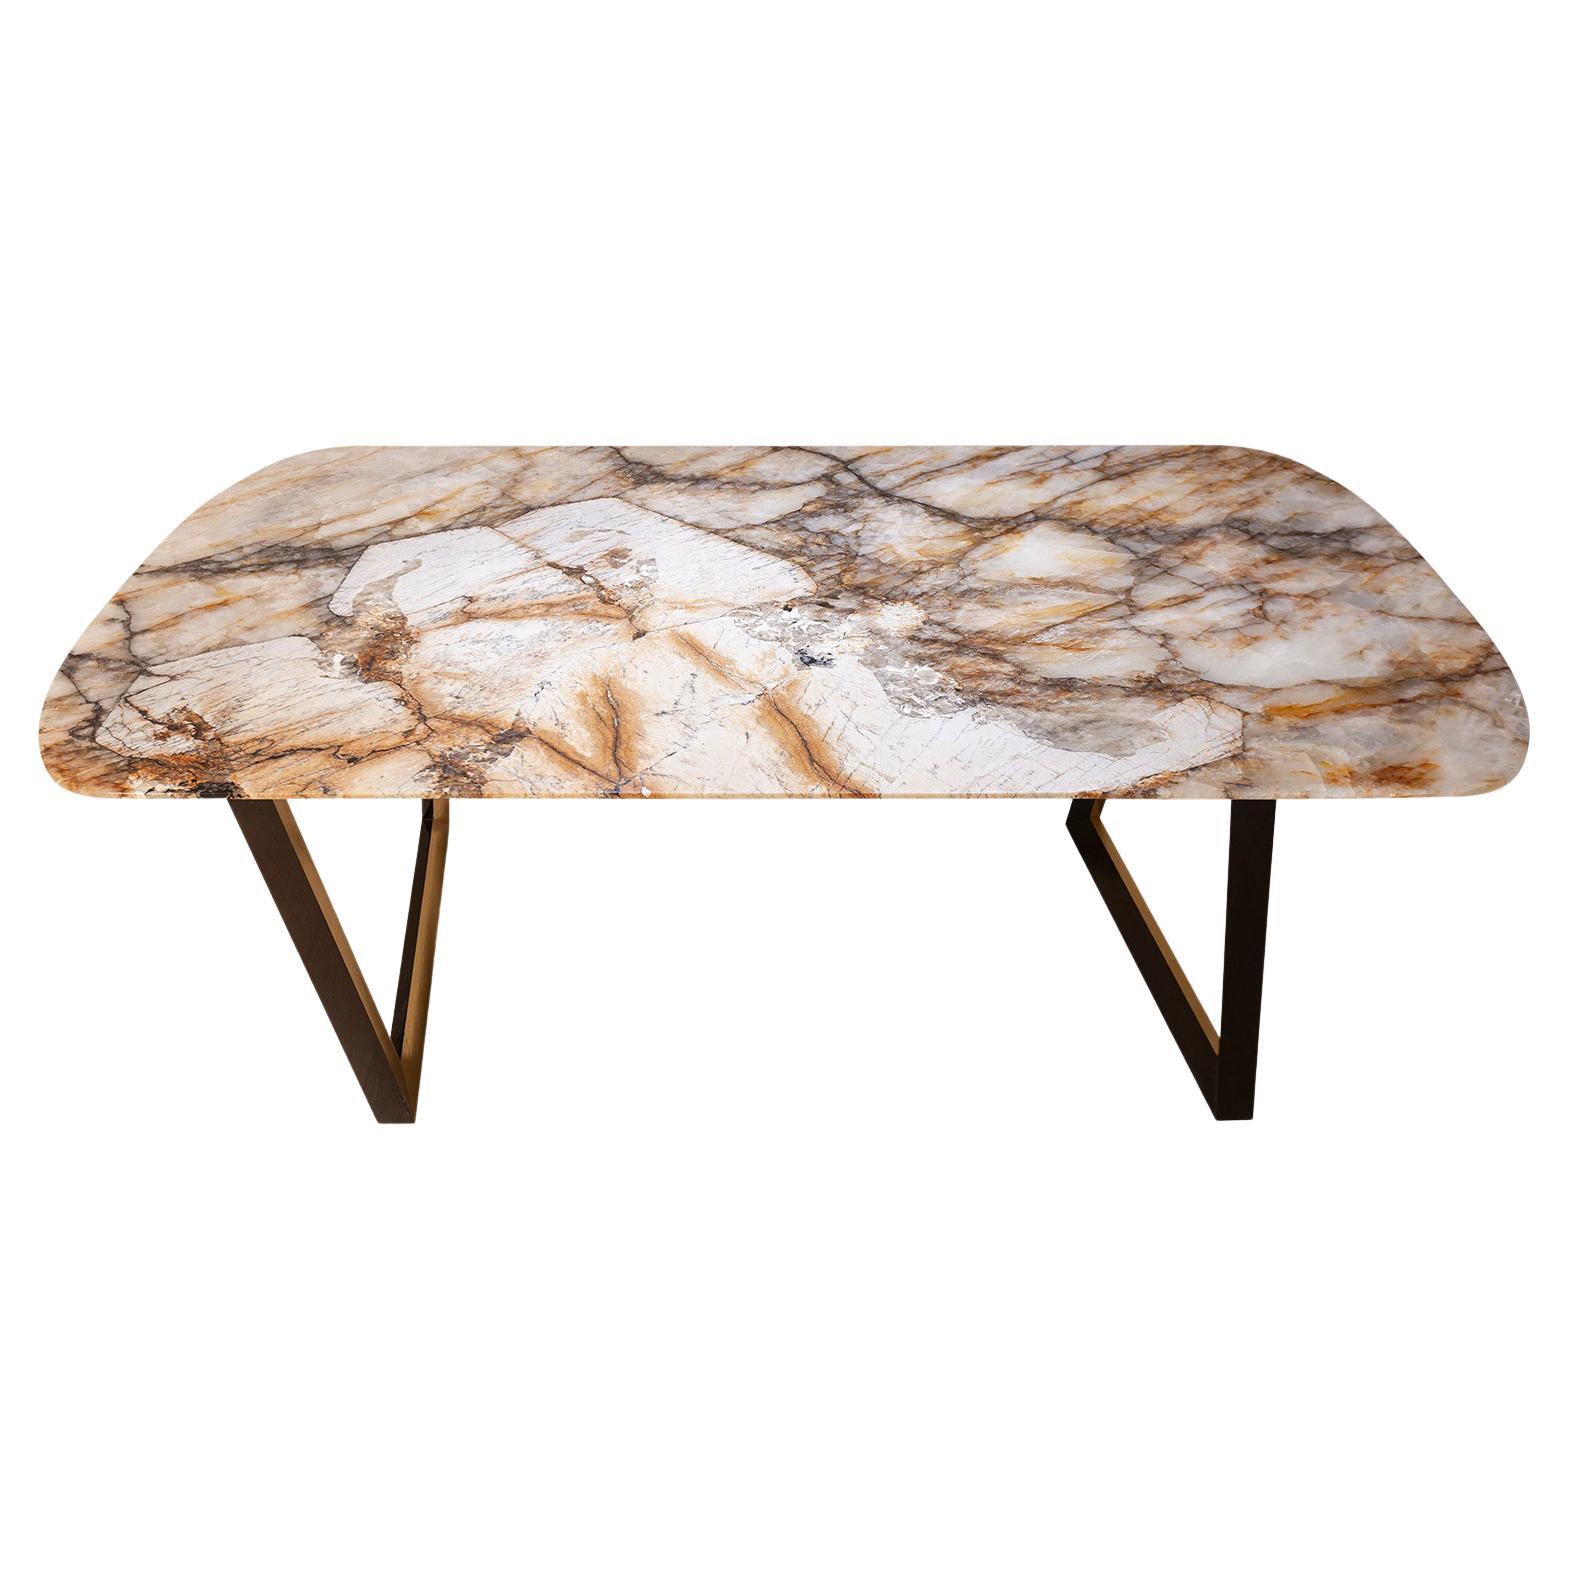 Greenapple Dining Table, Olisippo Dining Table, Granite, Handmade in Portugal